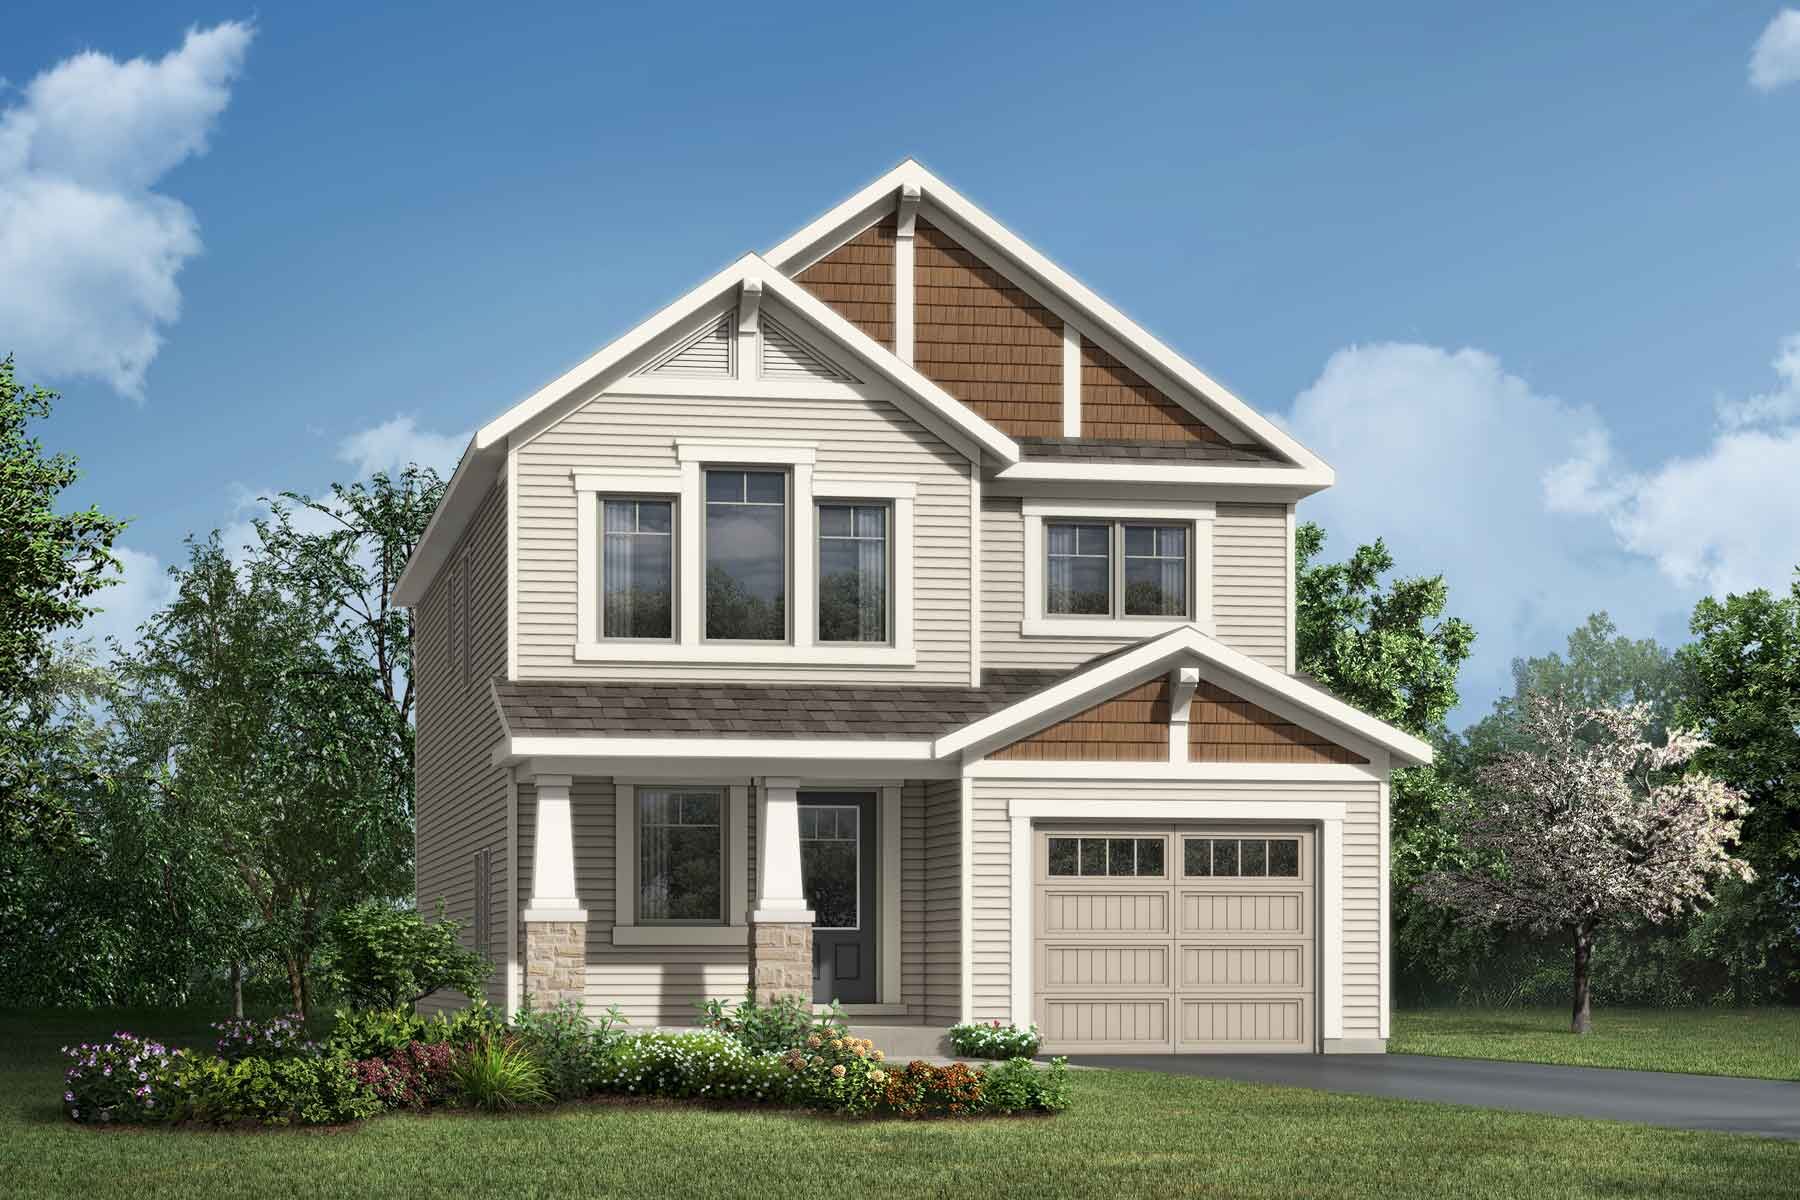 A Craftsman style detached home with a single car garage.